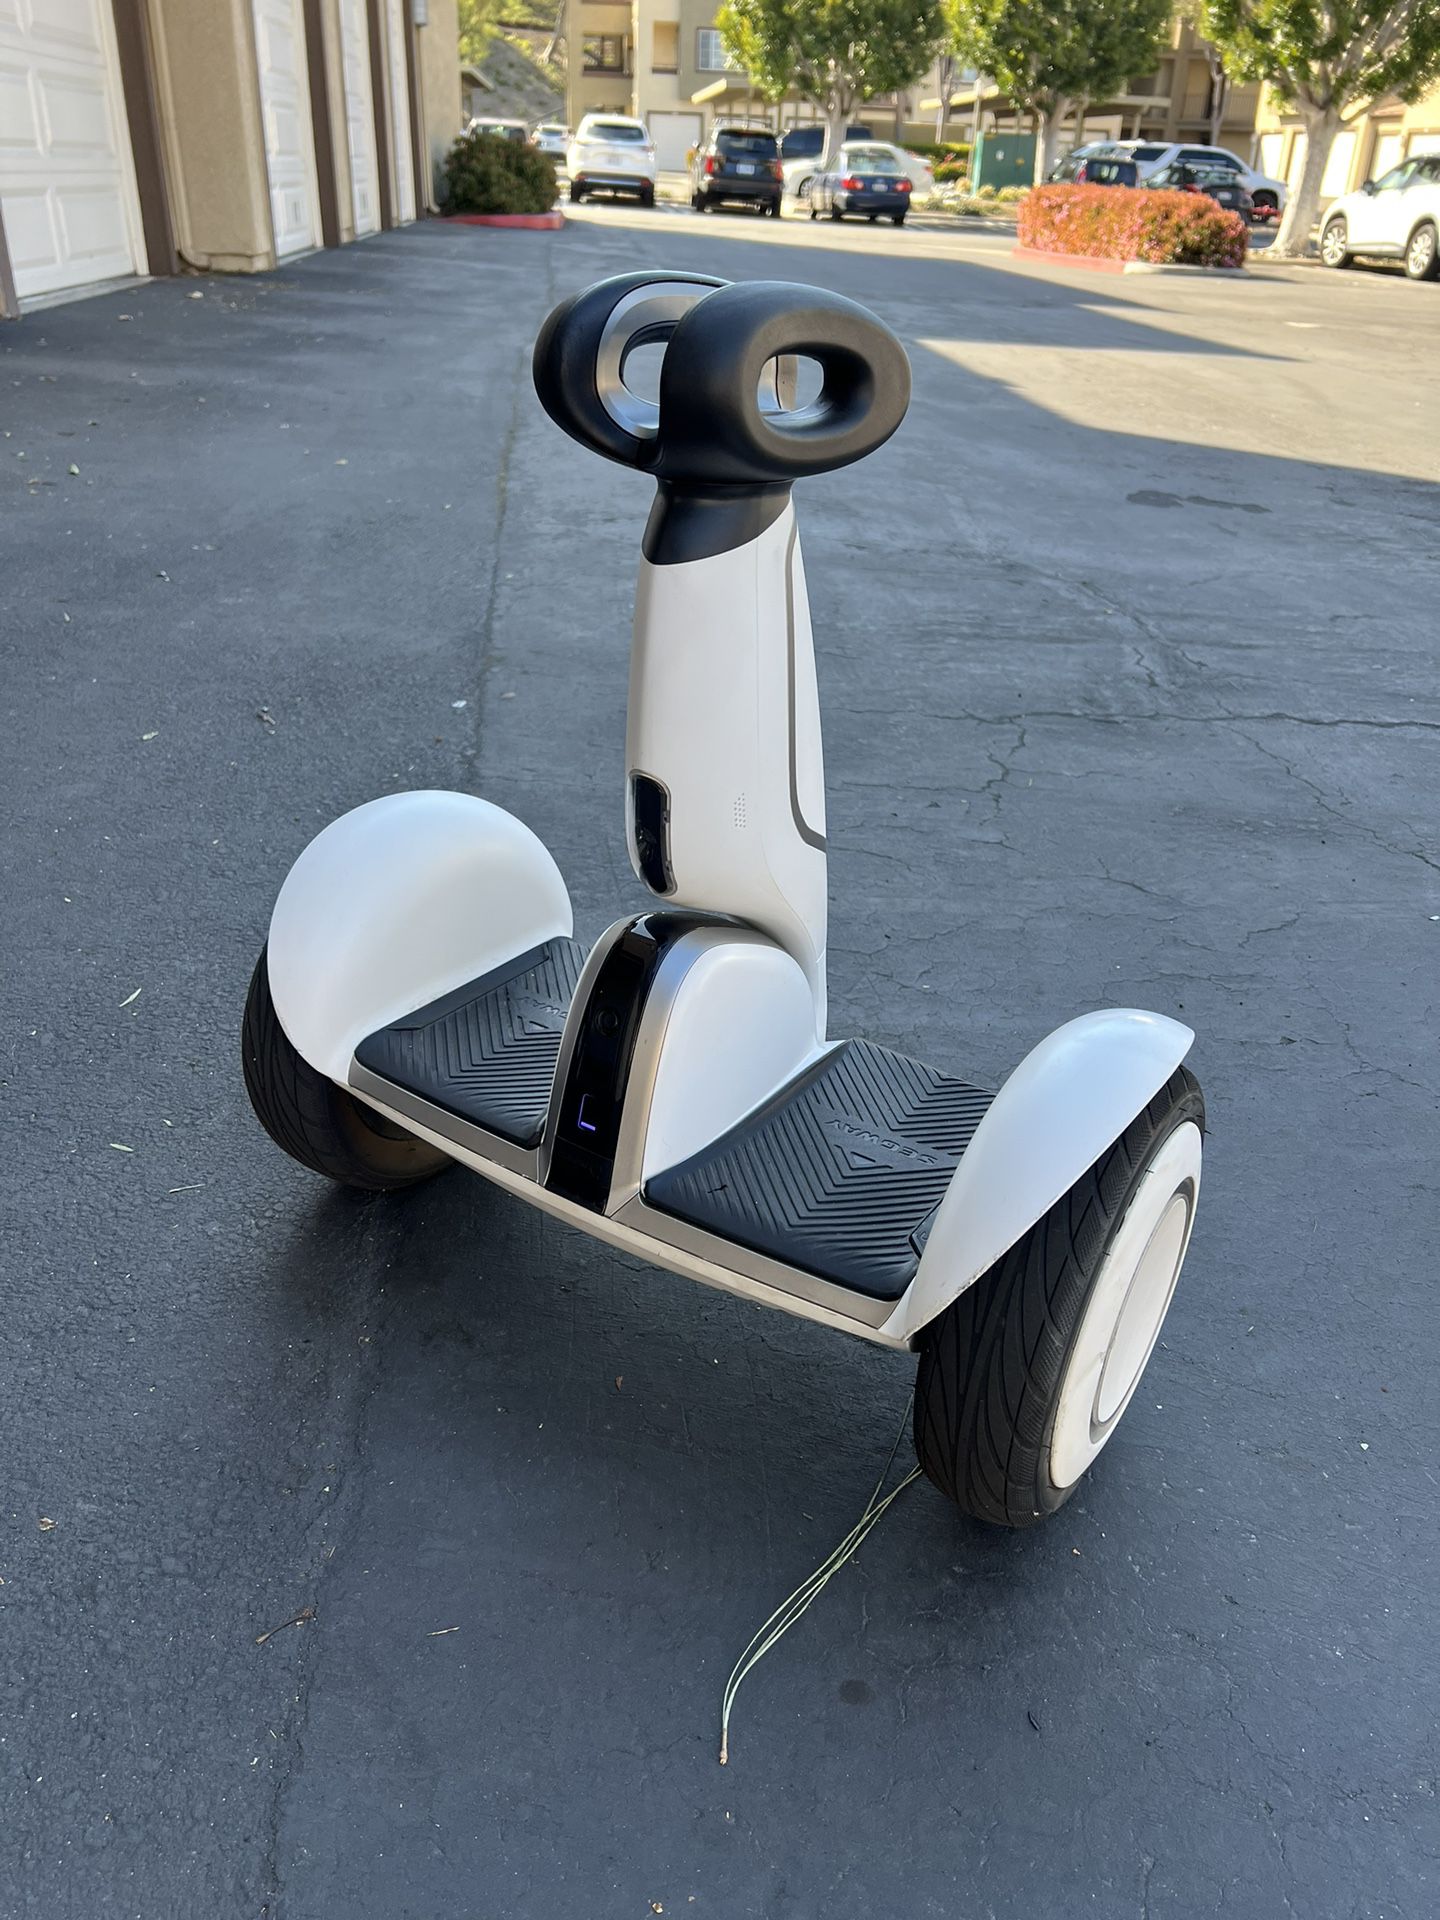 Segway - Ninebot by Segway - Segway Ninebot S - White - Hoverboard